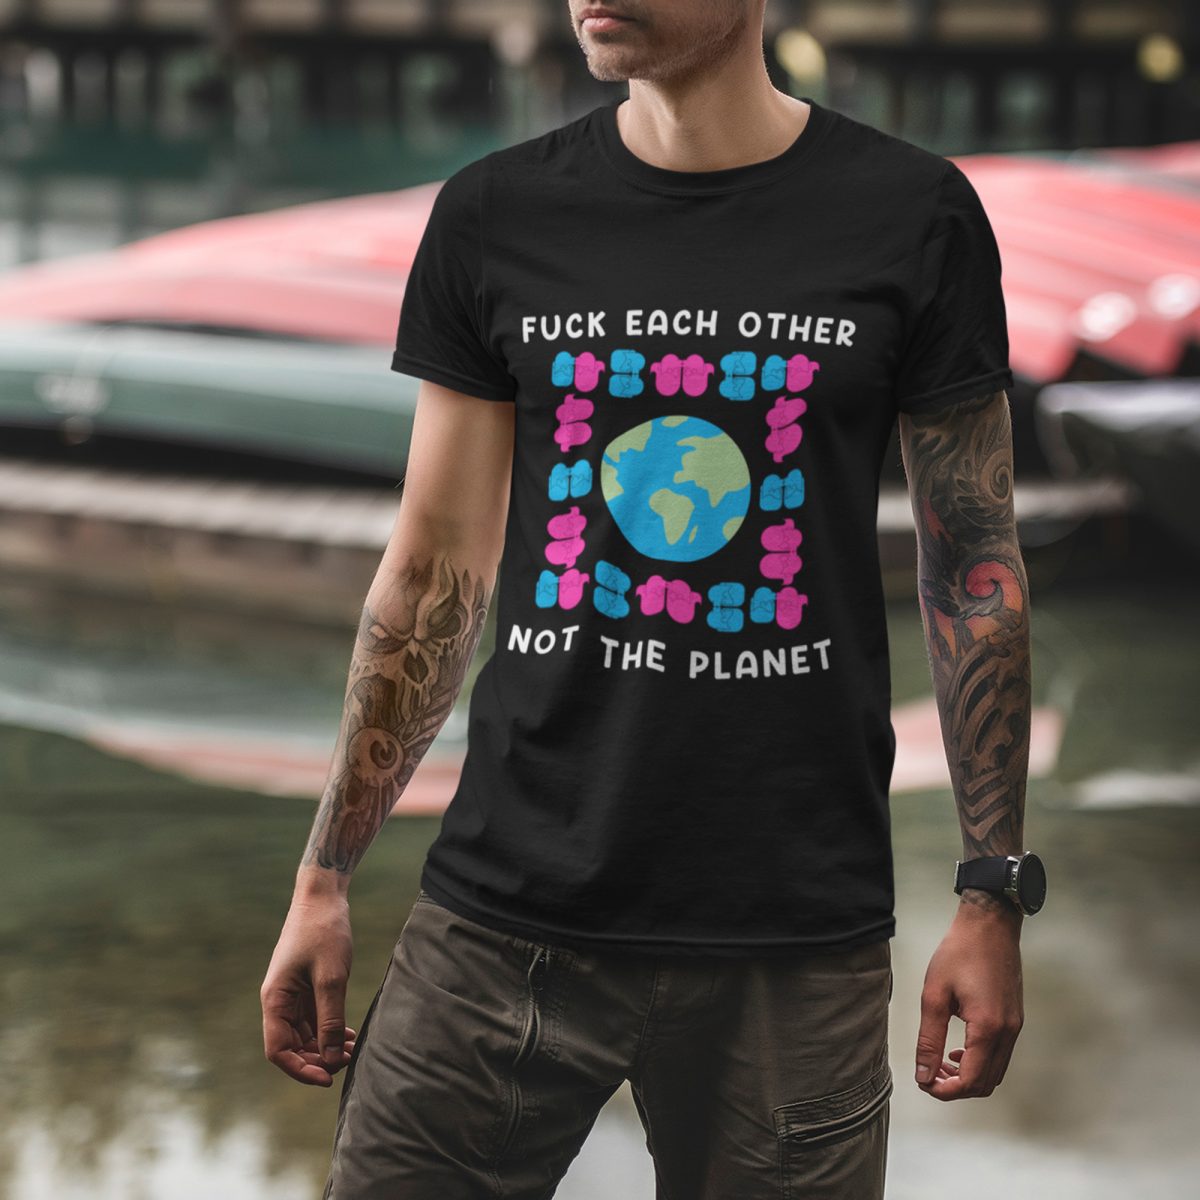 fuck-each-other-not-the-planet-filthy-BDSM-kinky-unisex-tshirt-4-2